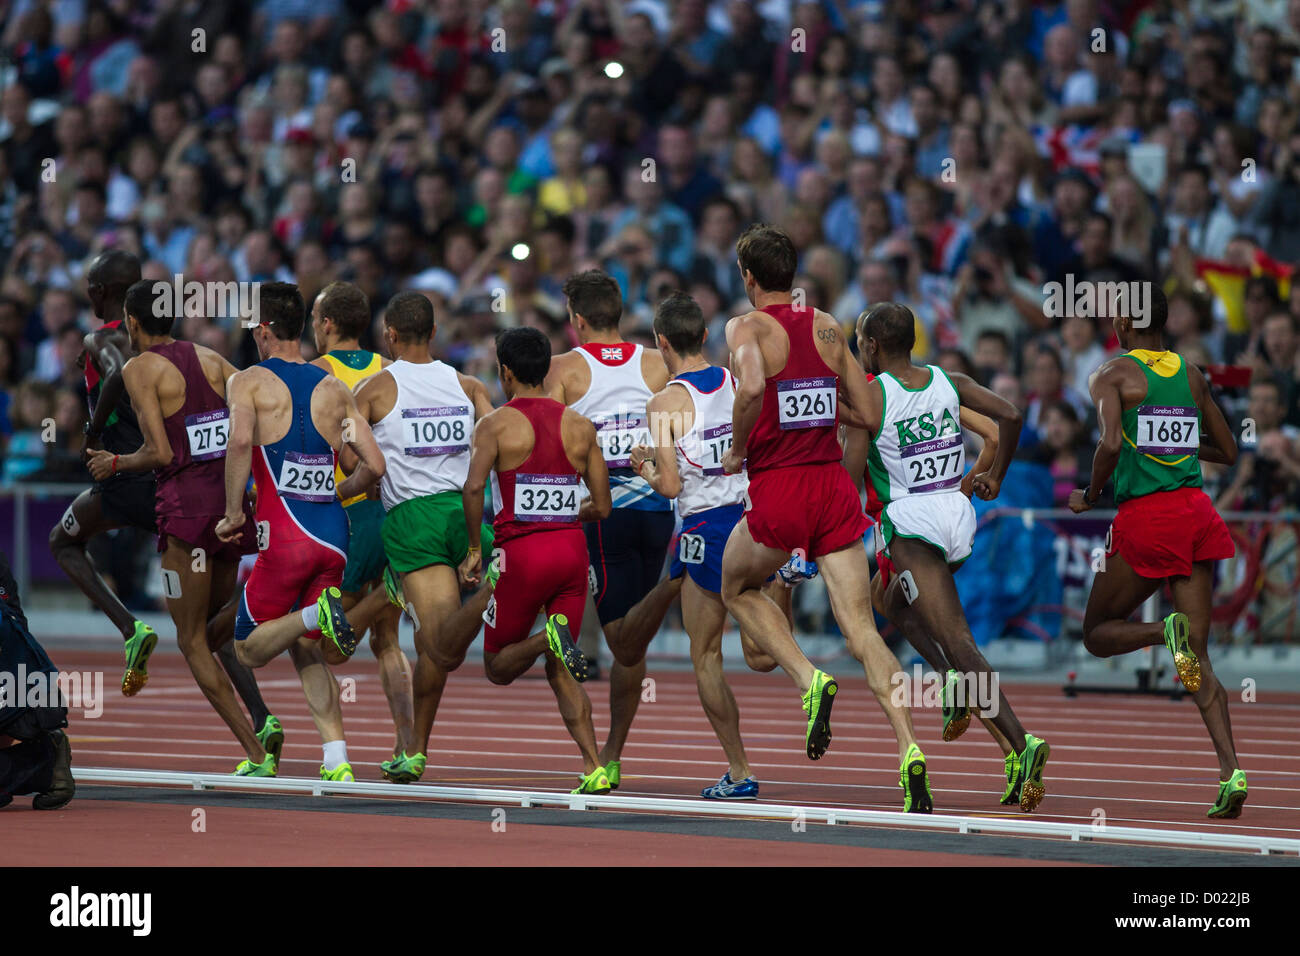 Men's 1500 meter semifinal at the Olympic Summer Games, London 2012 Stock Photo